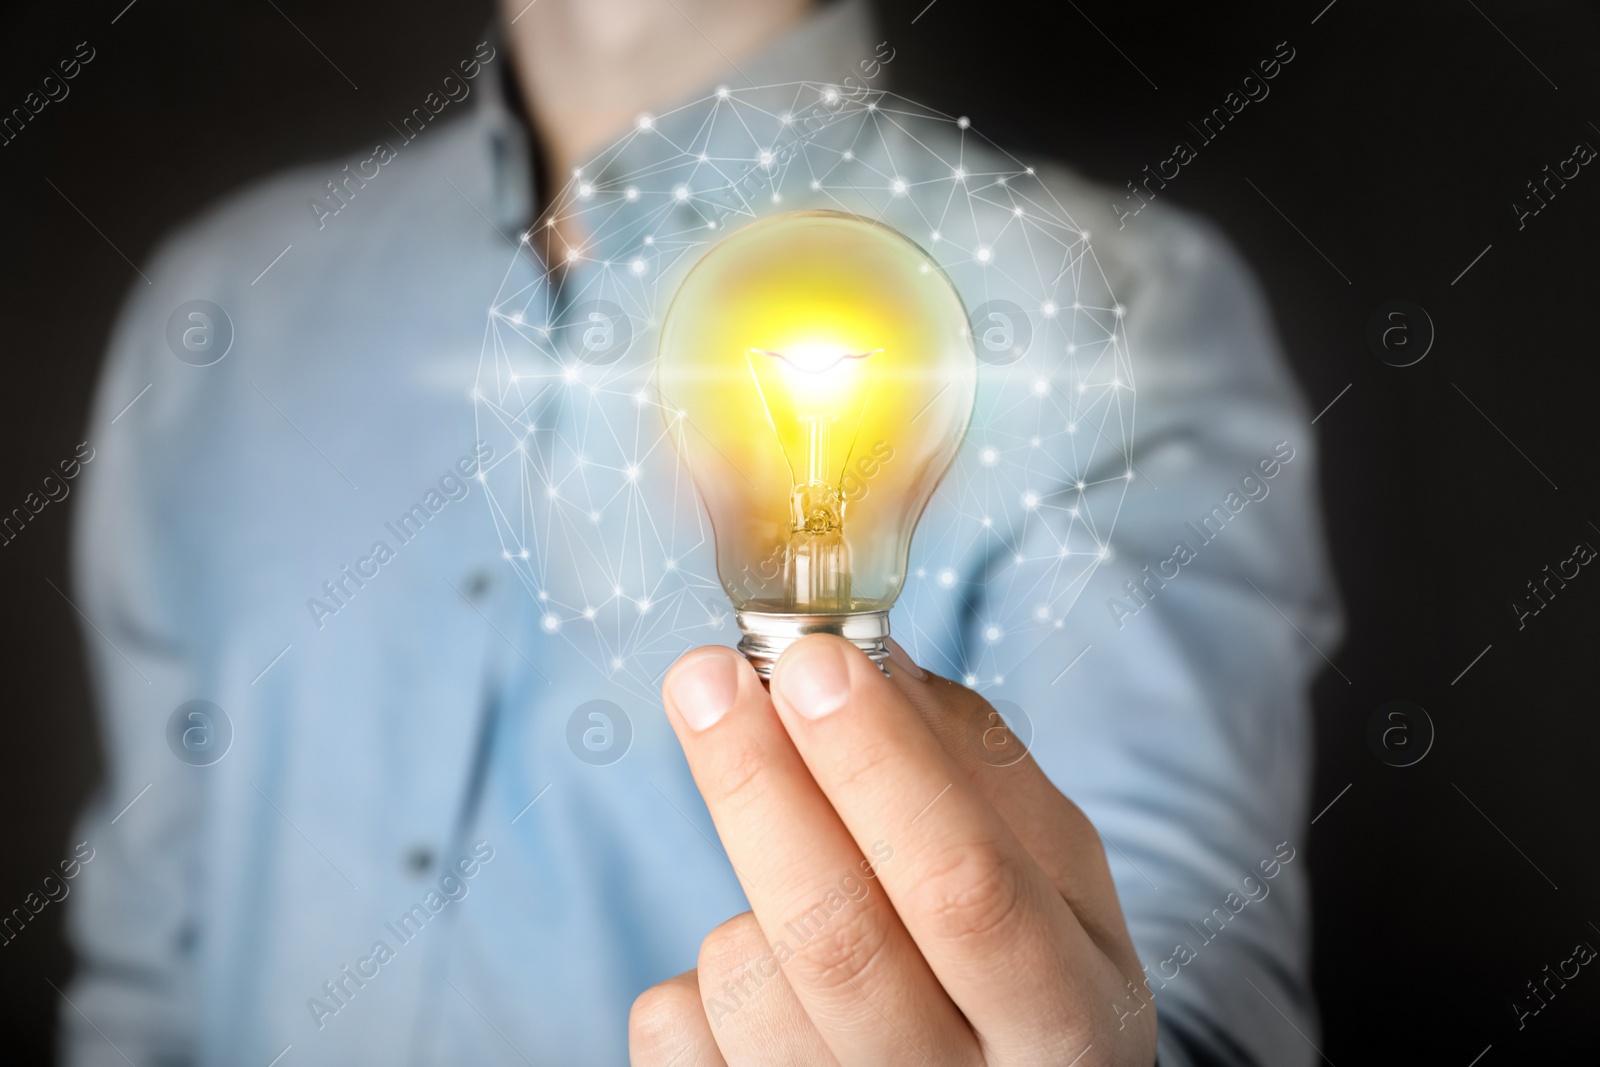 Image of Glow up your ideas. Man holding light bulb on dark background, closeup